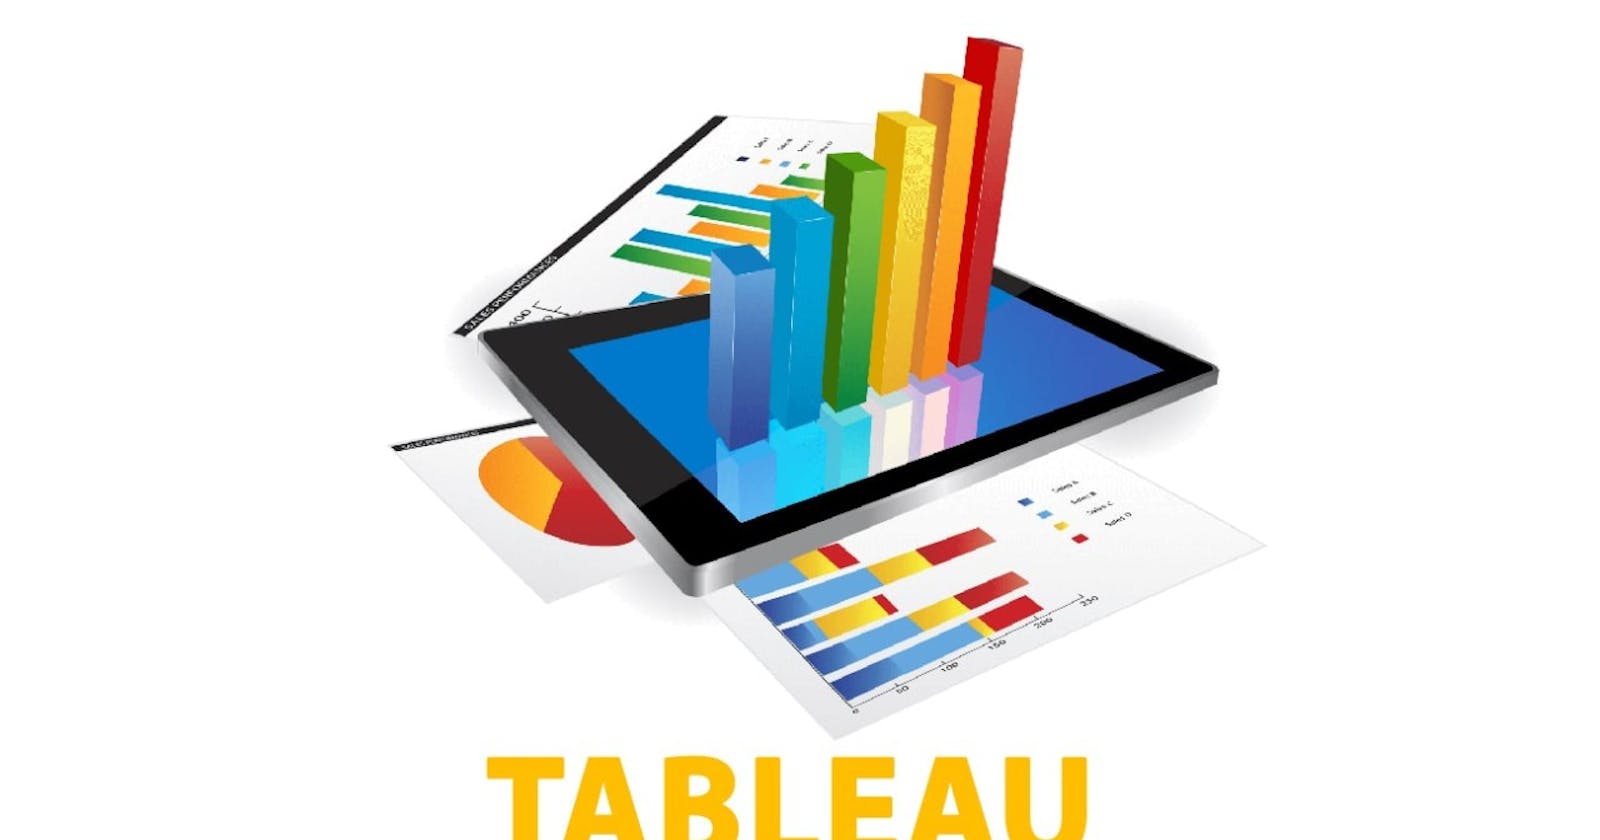 The Ultimate Guide to the Tableau Course That You Need